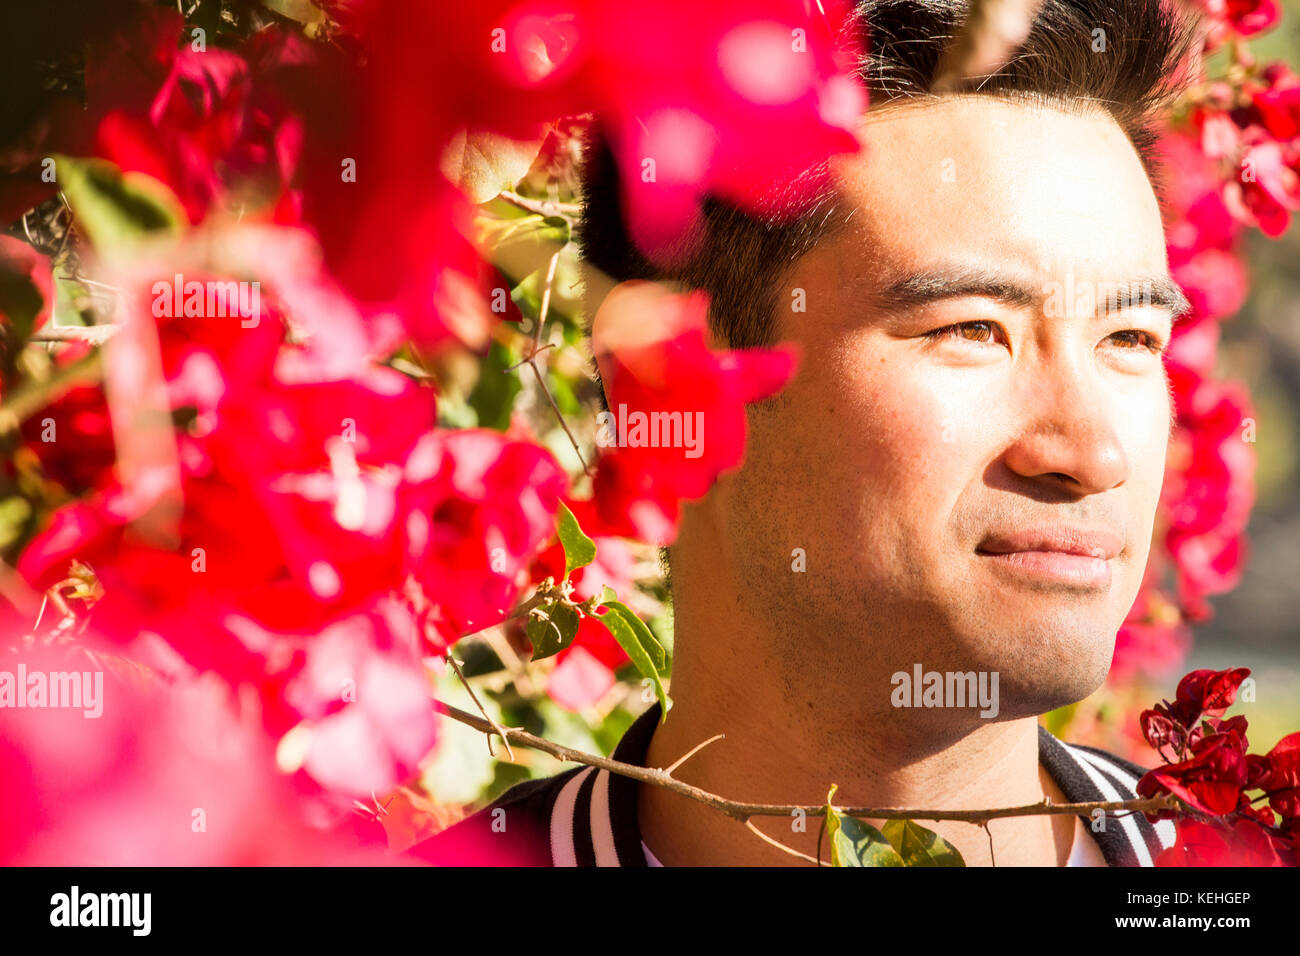 Portrait of smiling Chinese man near flowering tree Stock Photo